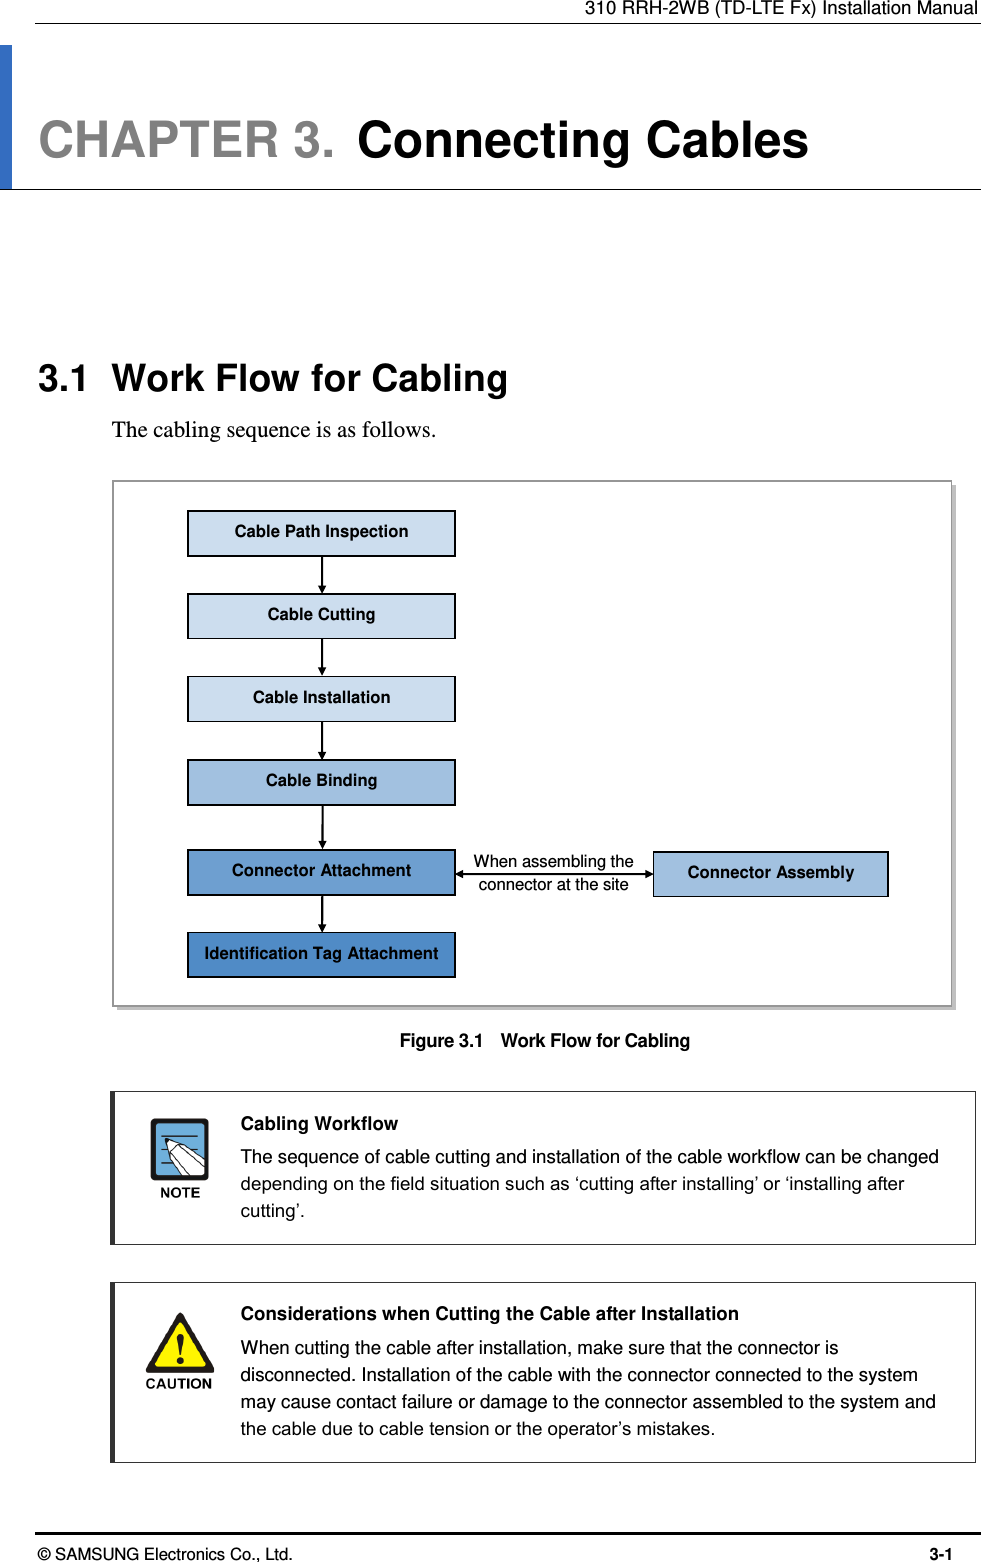 310 RRH-2WB (TD-LTE Fx) Installation Manual © SAMSUNG Electronics Co., Ltd.  3-1 CHAPTER 3.  Connecting Cables      3.1  Work Flow for Cabling The cabling sequence is as follows.    Figure 3.1  Work Flow for Cabling   Cabling Workflow   The sequence of cable cutting and installation of the cable workflow can be changed depending on the field situation such as ‘cutting after installing’ or ‘installing after cutting’.   Considerations when Cutting the Cable after Installation   When cutting the cable after installation, make sure that the connector is disconnected. Installation of the cable with the connector connected to the system may cause contact failure or damage to the connector assembled to the system and the cable due to cable tension or the operator’s mistakes. Cable Installation Cable Binding Connector Attachment Identification Tag Attachment Connector Assembly When assembling the connector at the site Cable Path Inspection Cable Cutting 